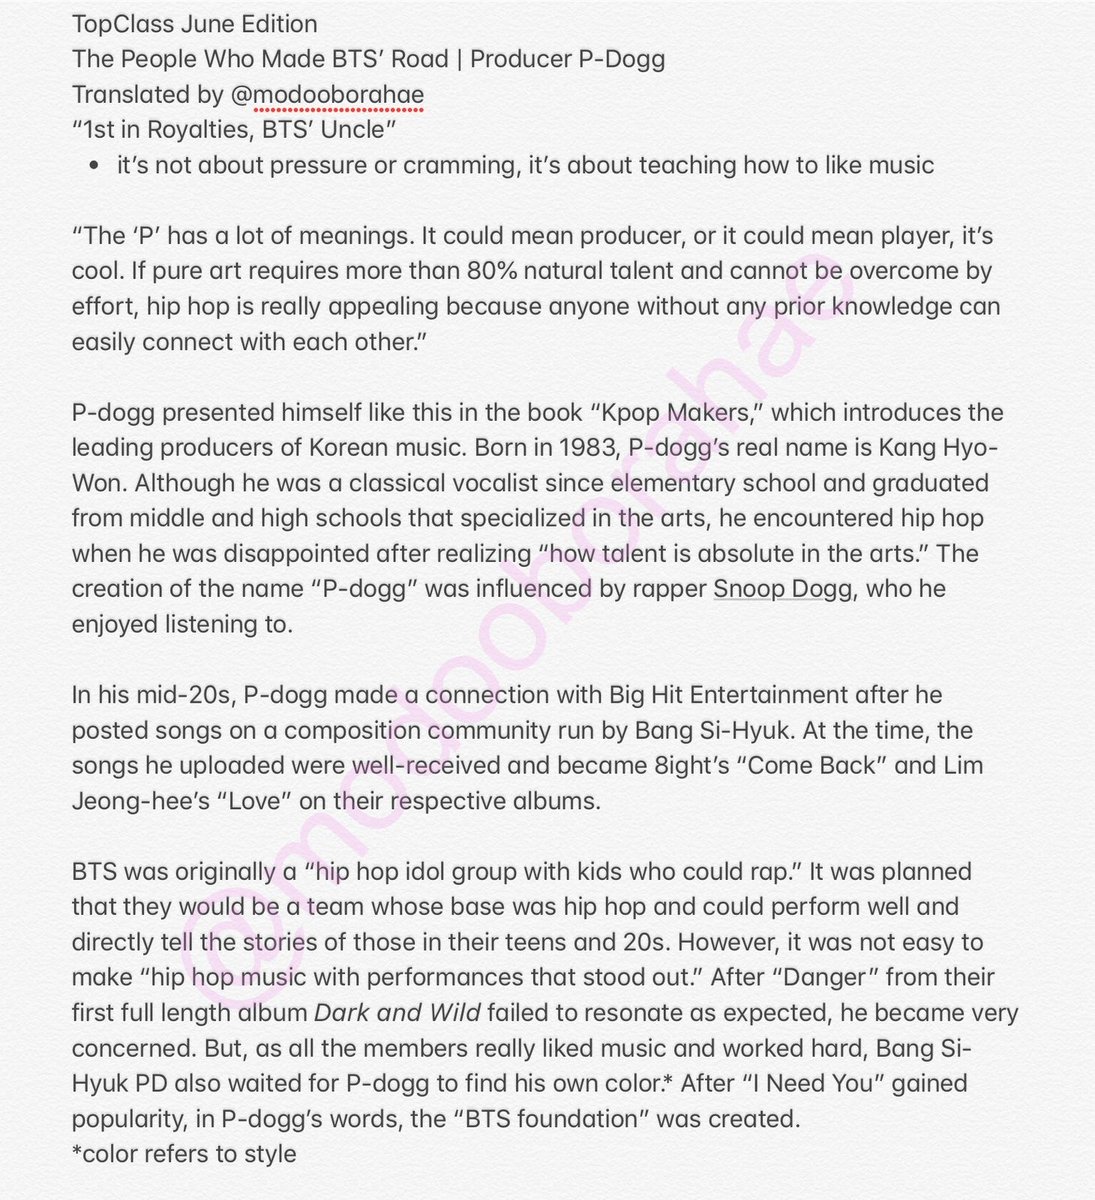 Here’s the article on P-dogg. (Their classes before their debut must have been so interesting).  @BTS_twt  #BTS  #방탄소년단  http://topclass.chosun.com/mobile/board/view.asp?catecode=R&tnu=201906100010